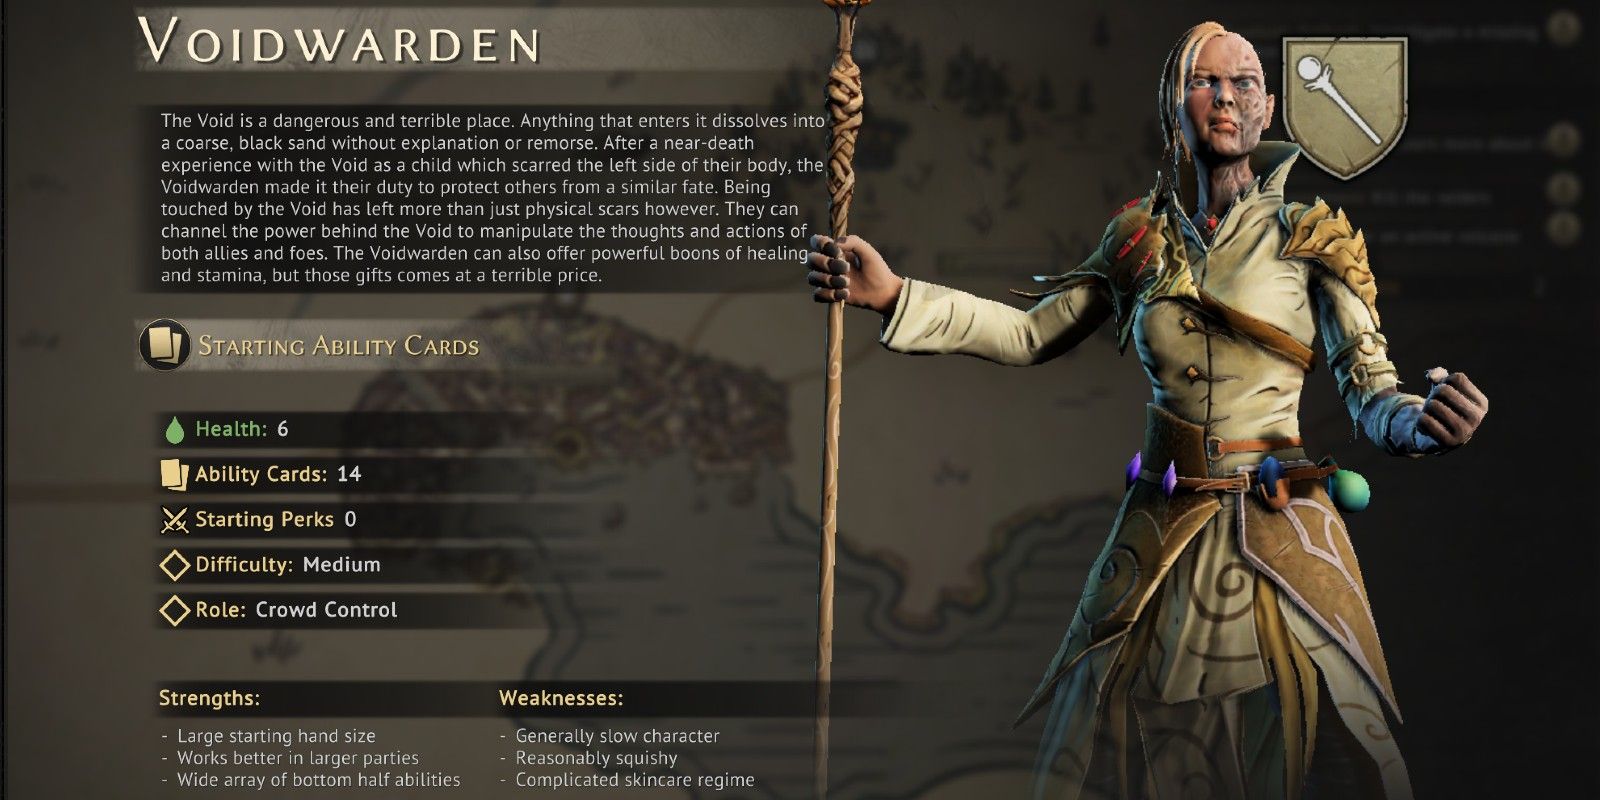 Gloomhaven: Jaws of the Lion DLC Void Warden Character Guide